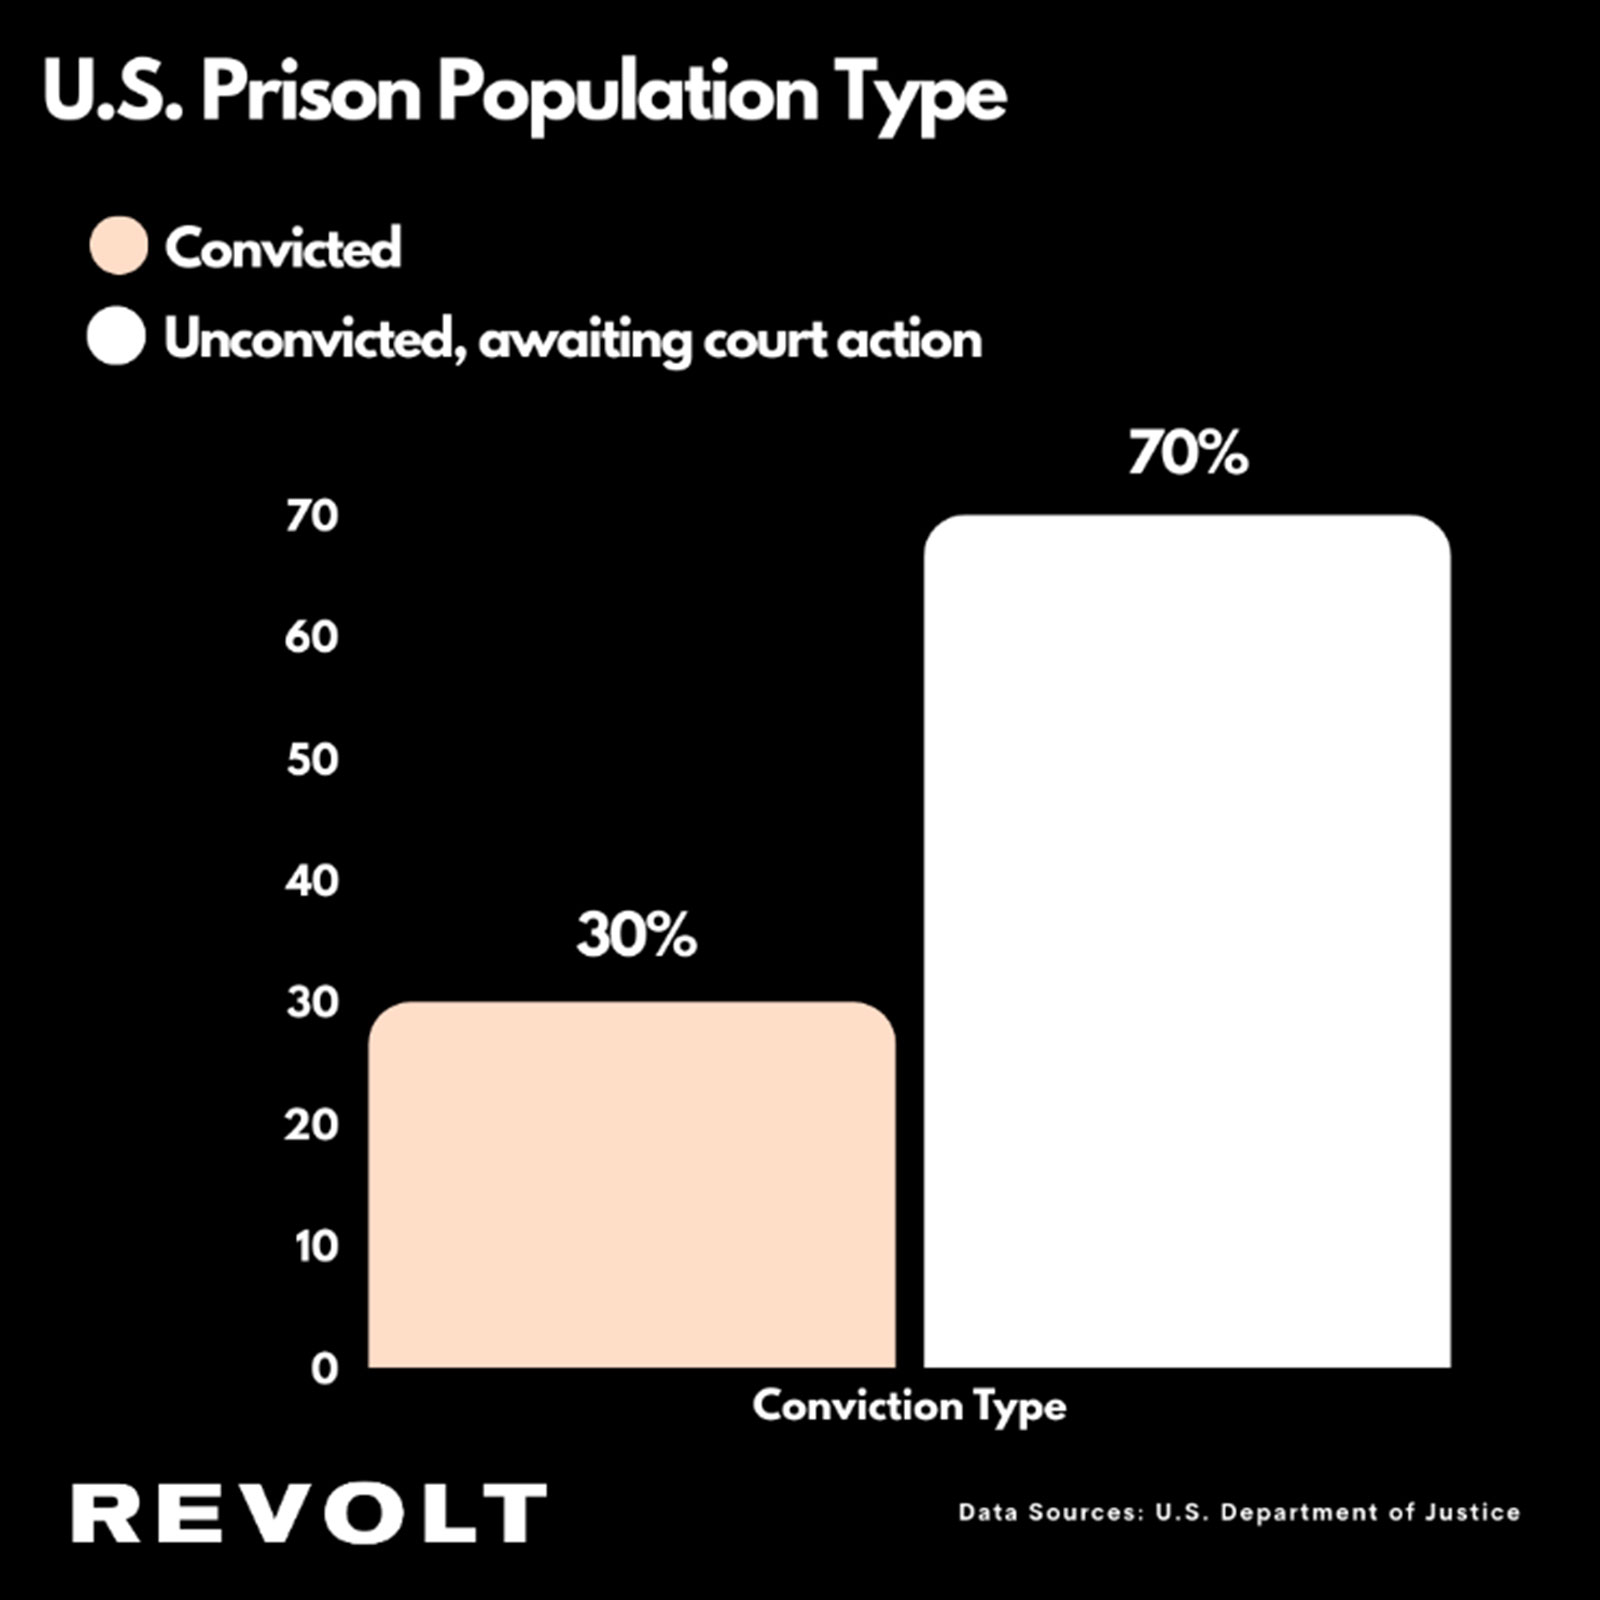 Graphic by REVOLT. Data Sources: U.S. Department of Justice